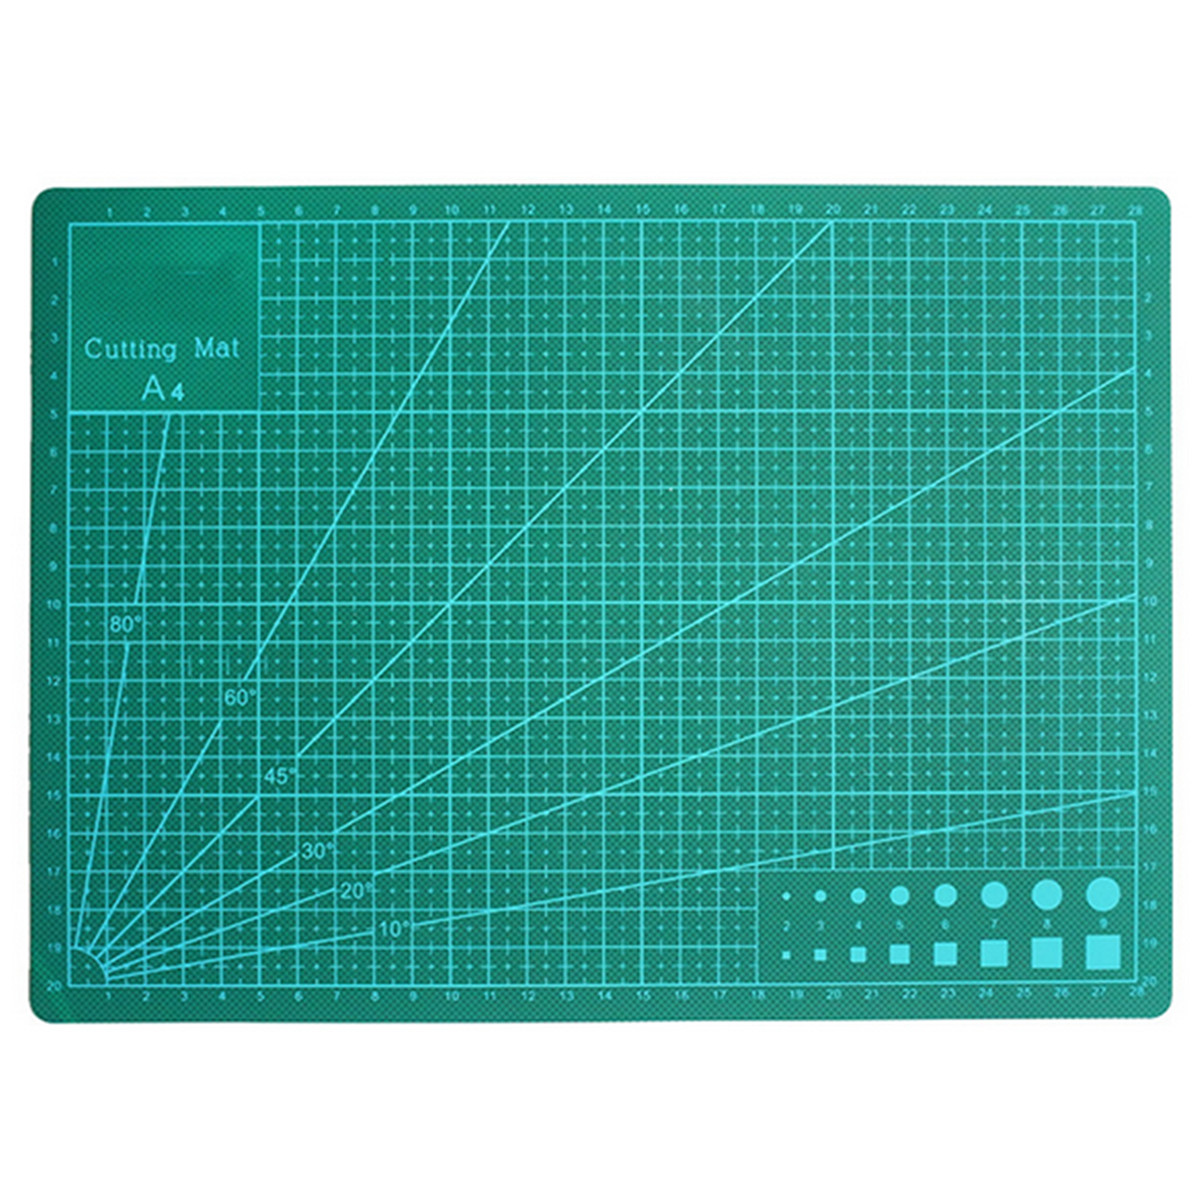 Double-Sided-Green-Cutting-Mat-Board-A4-Size-Pad-Model-Healing-Design-Craft-Tool-1202777-5